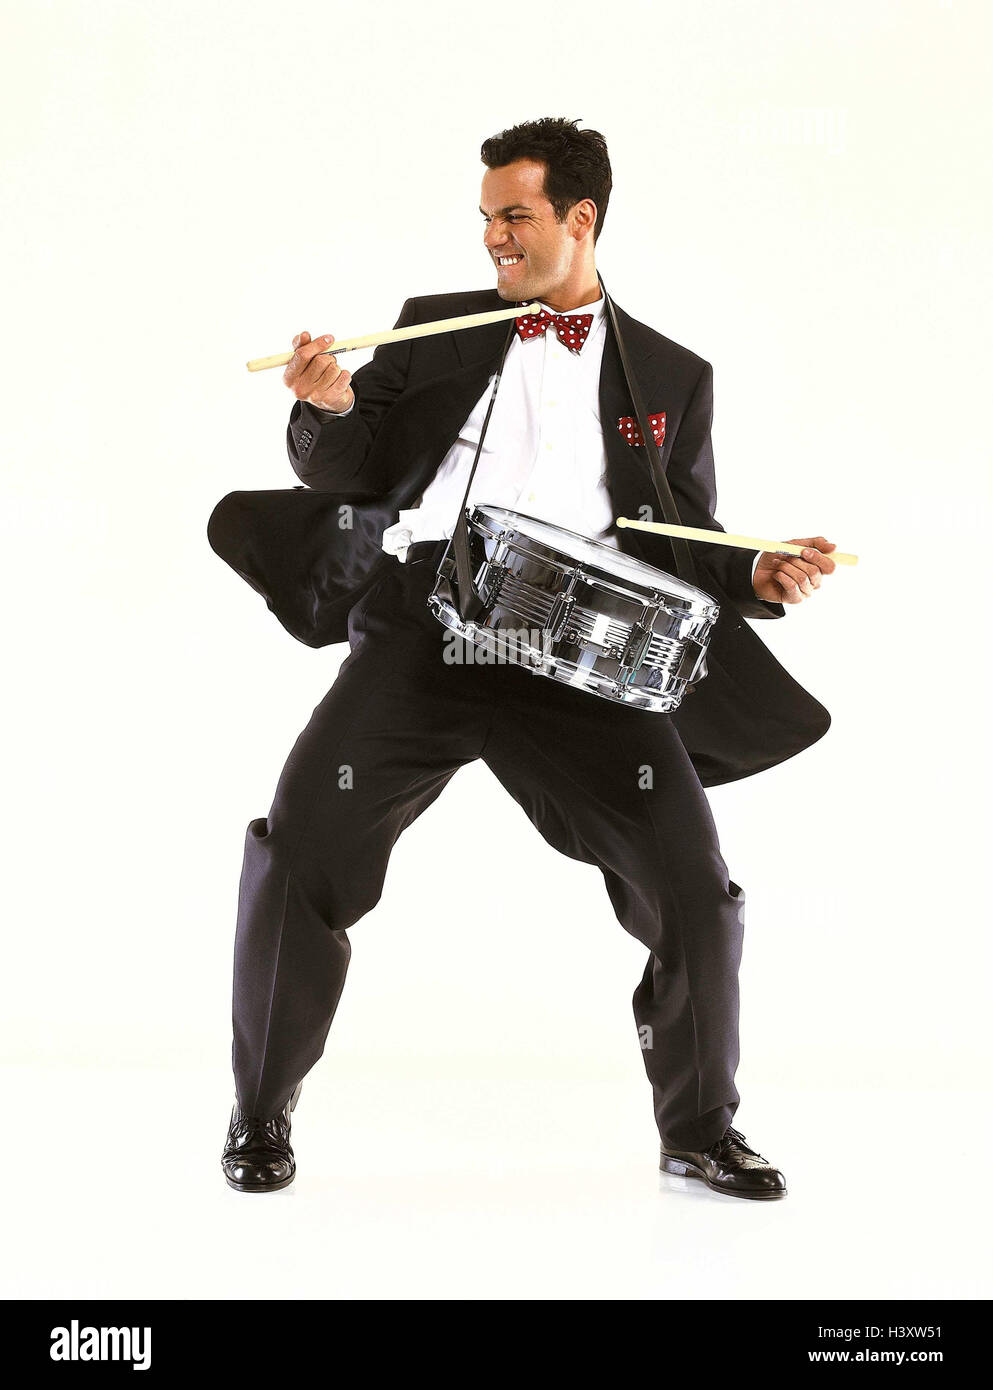 Man, young, suit, music, Tommeln Men, cut outs, studio, drummer, drum, drumsticks, Sticks, hit, drummer, music, musician, enthusiastically, action, melted, enthusiasm, percussion instrument, instrument, musical instrument, Stock Photo